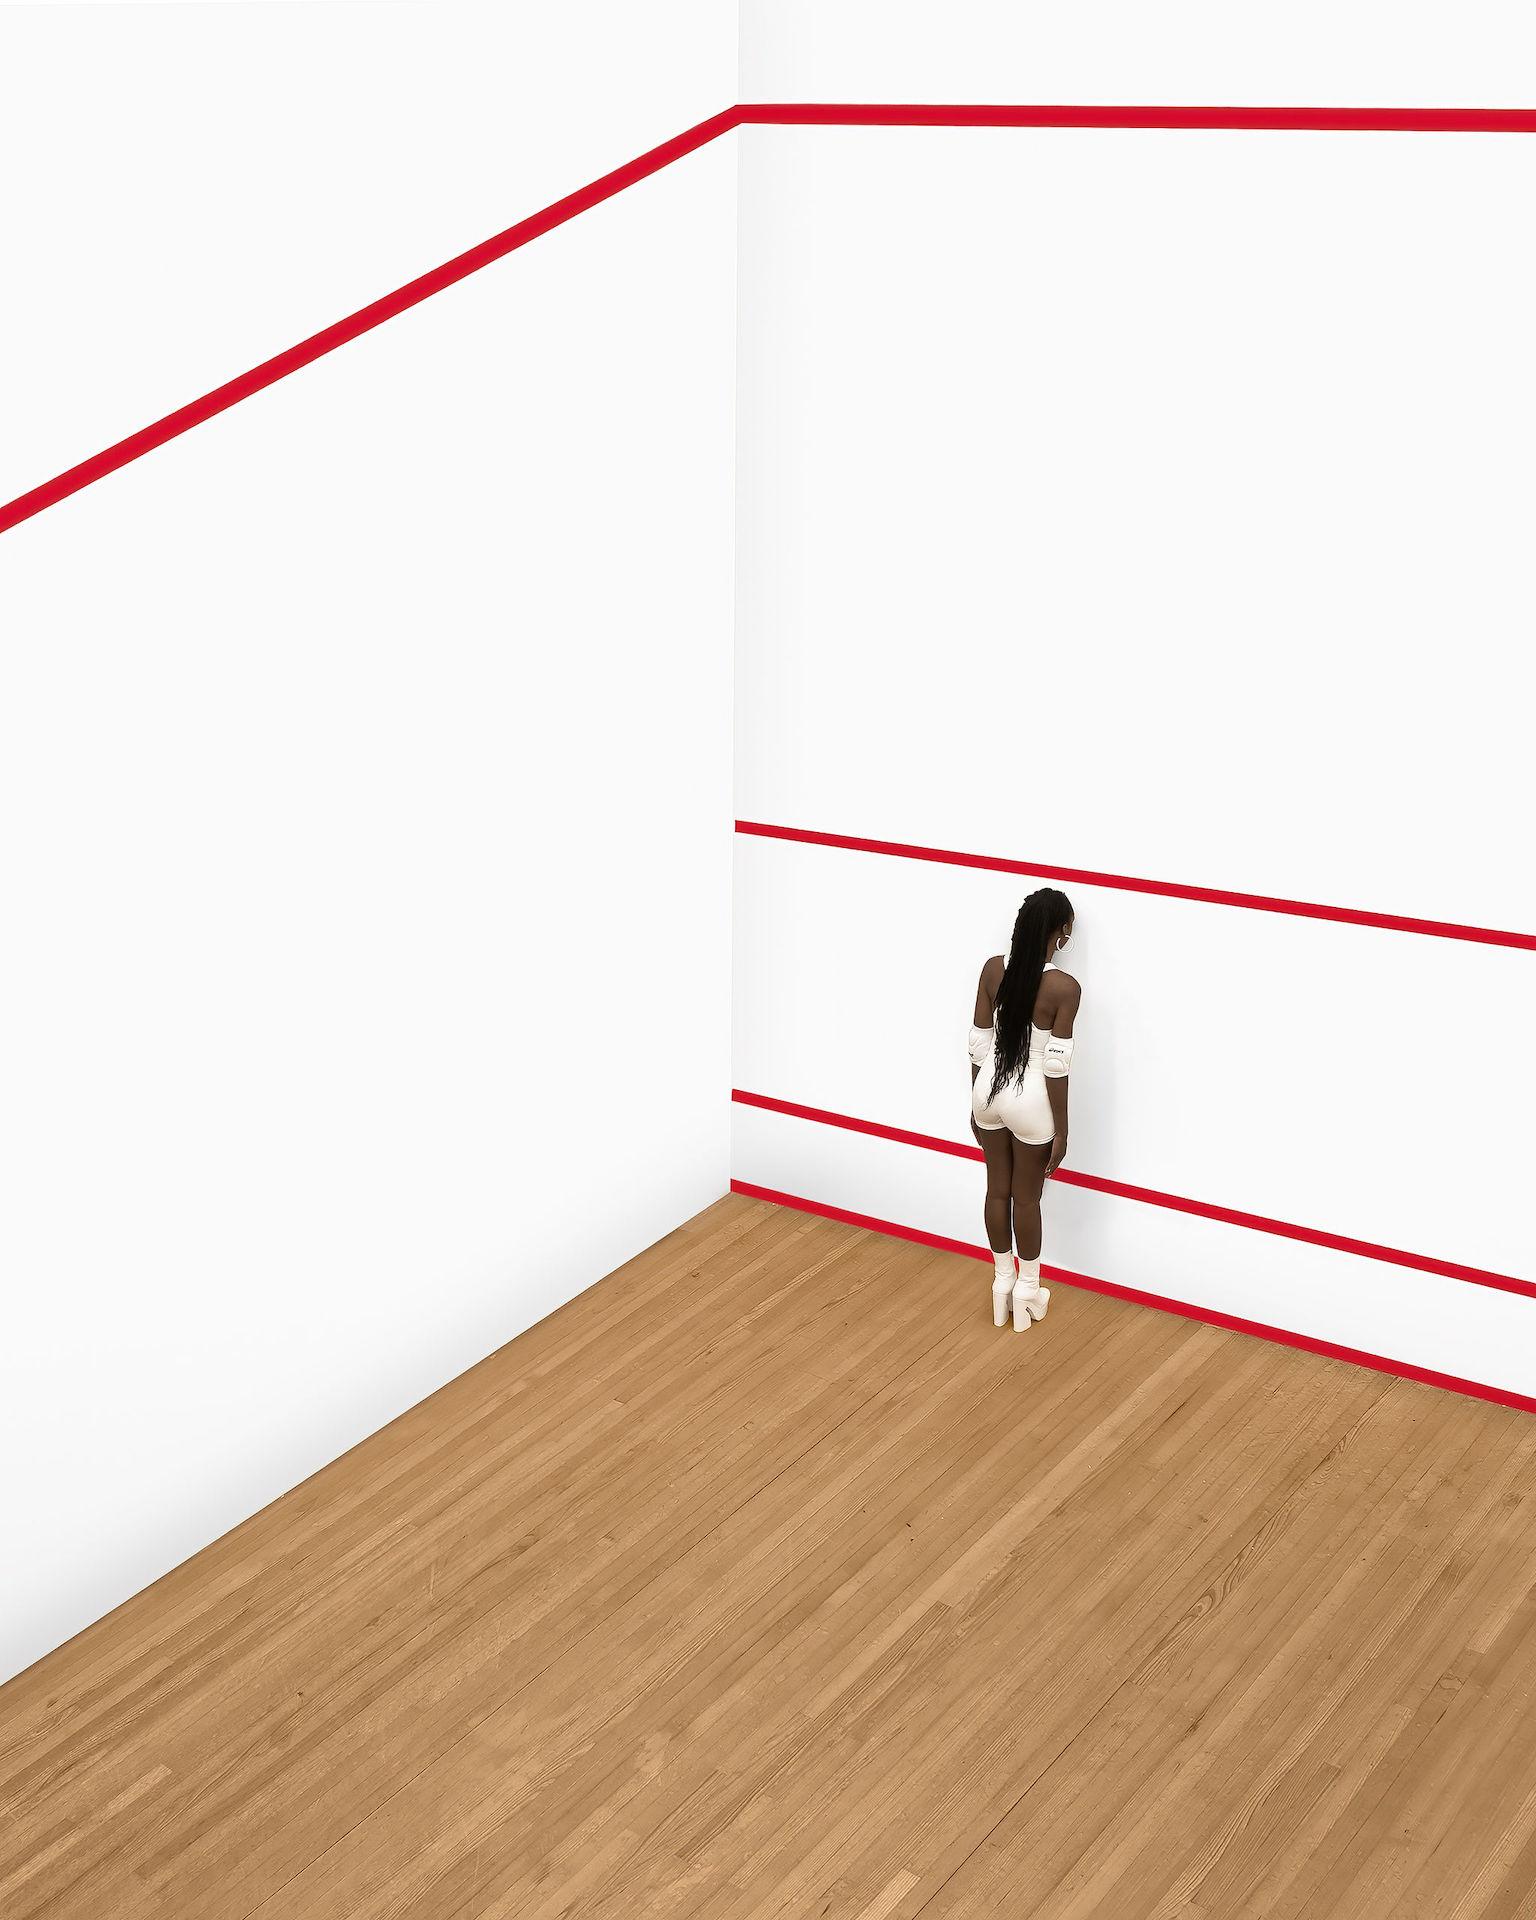 Brad Walls on His New Squash Court Drone Photography Series “Vacant”